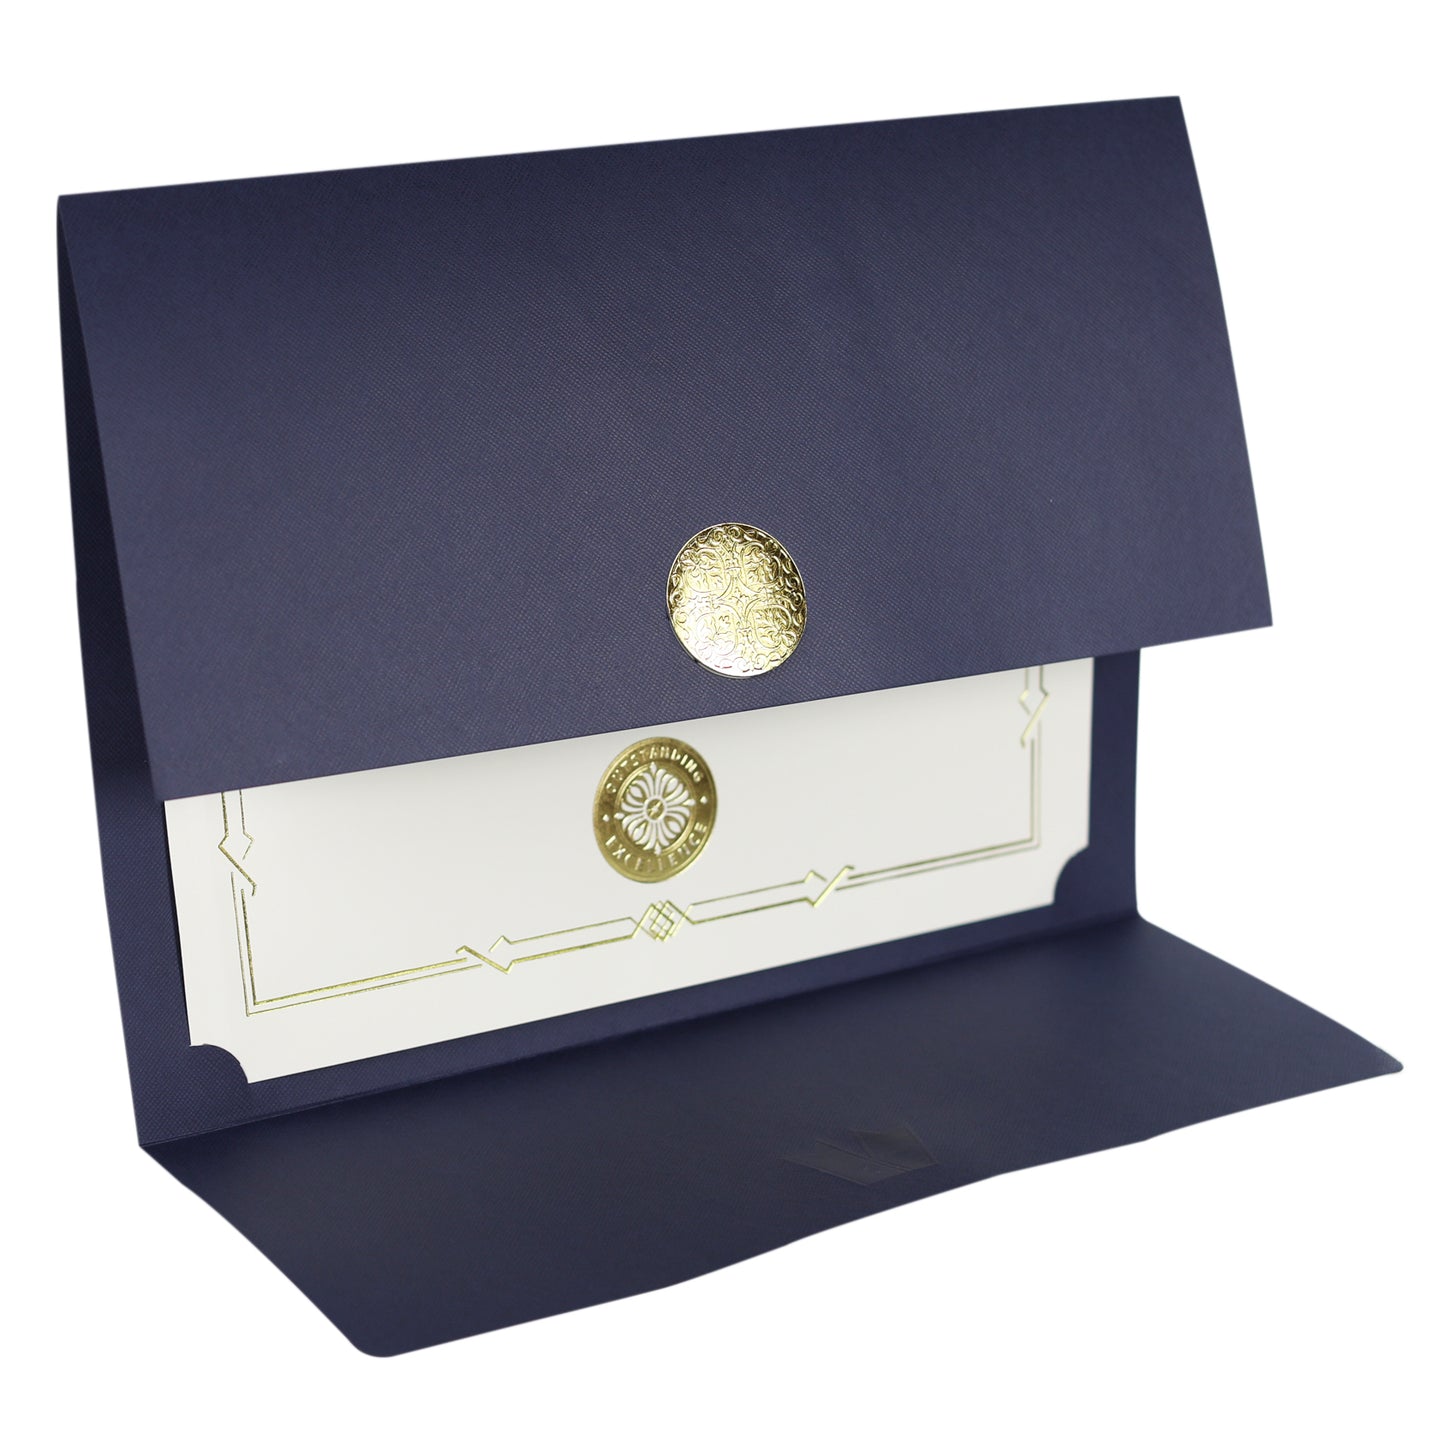 St. James® Certificate Holders/Document Covers/Diploma Holders, Navy Blue, Gold Award Seal with Gold Ribbon, Pack of 5, 83816